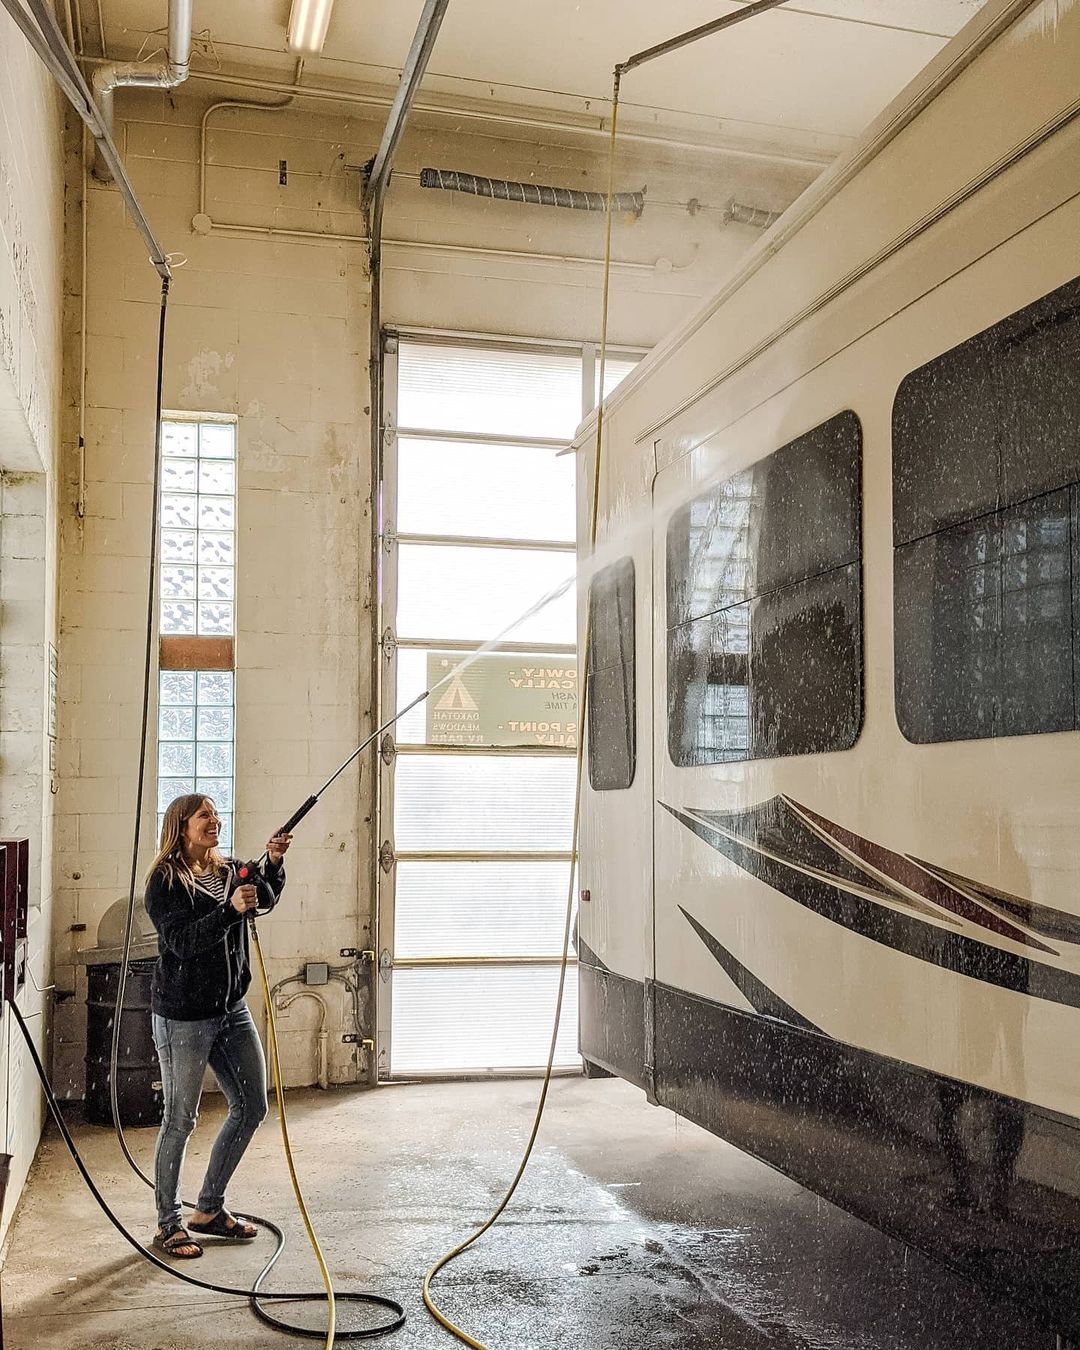 Woman washing her RV with powerful hose. Photo by Instagram User @so.wickesited